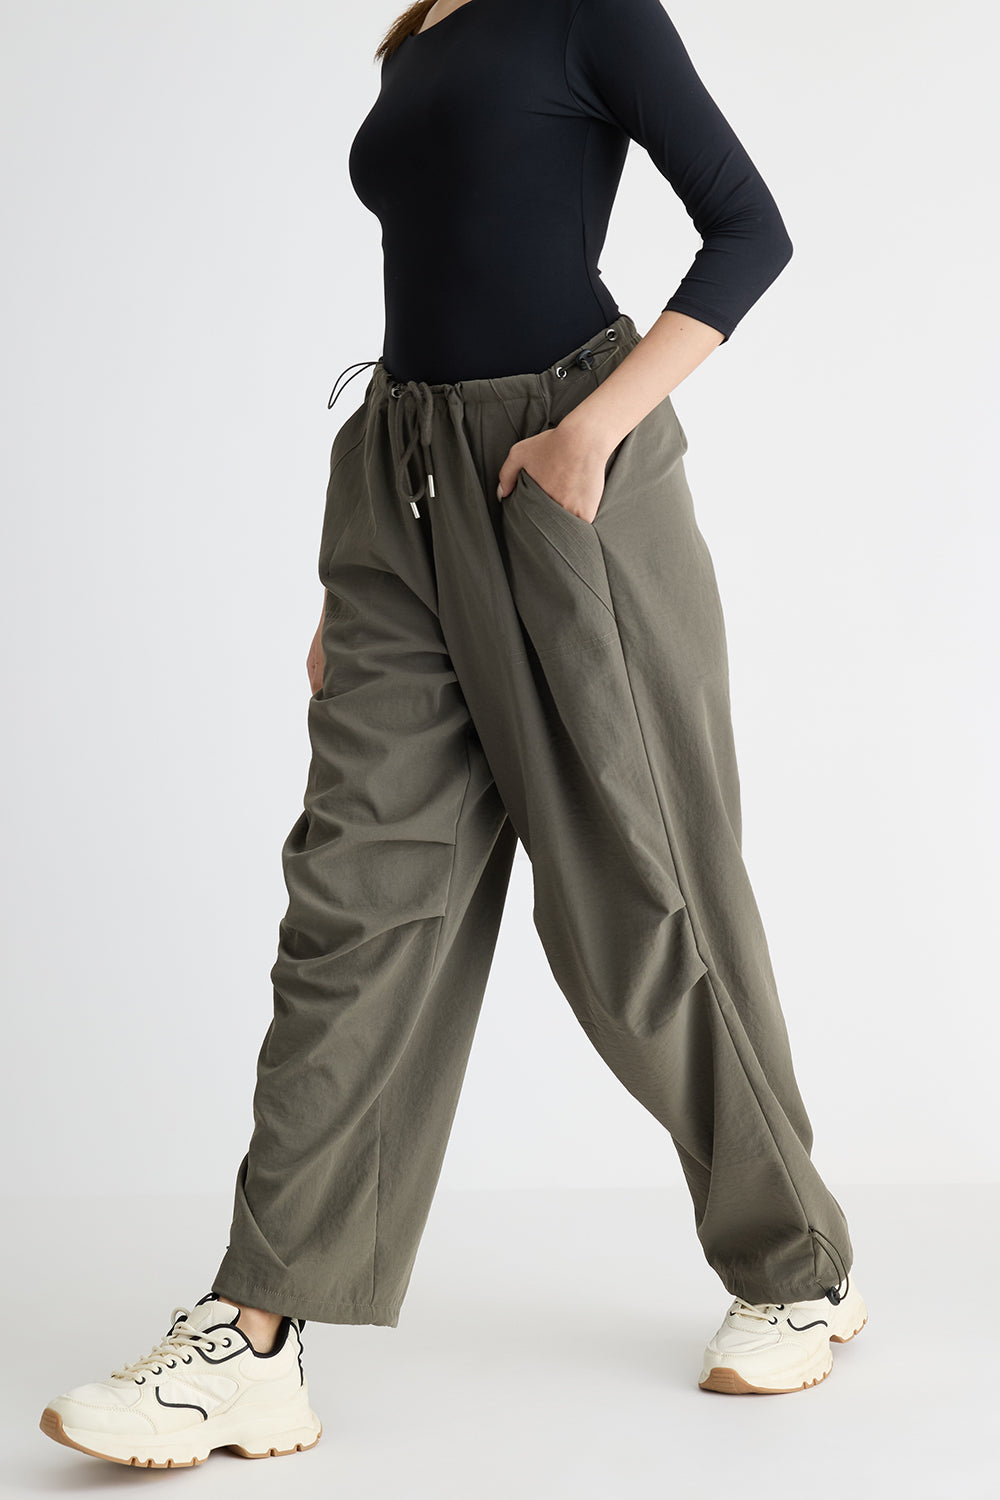 Style File Olive Parachute Pants – Rebelflow